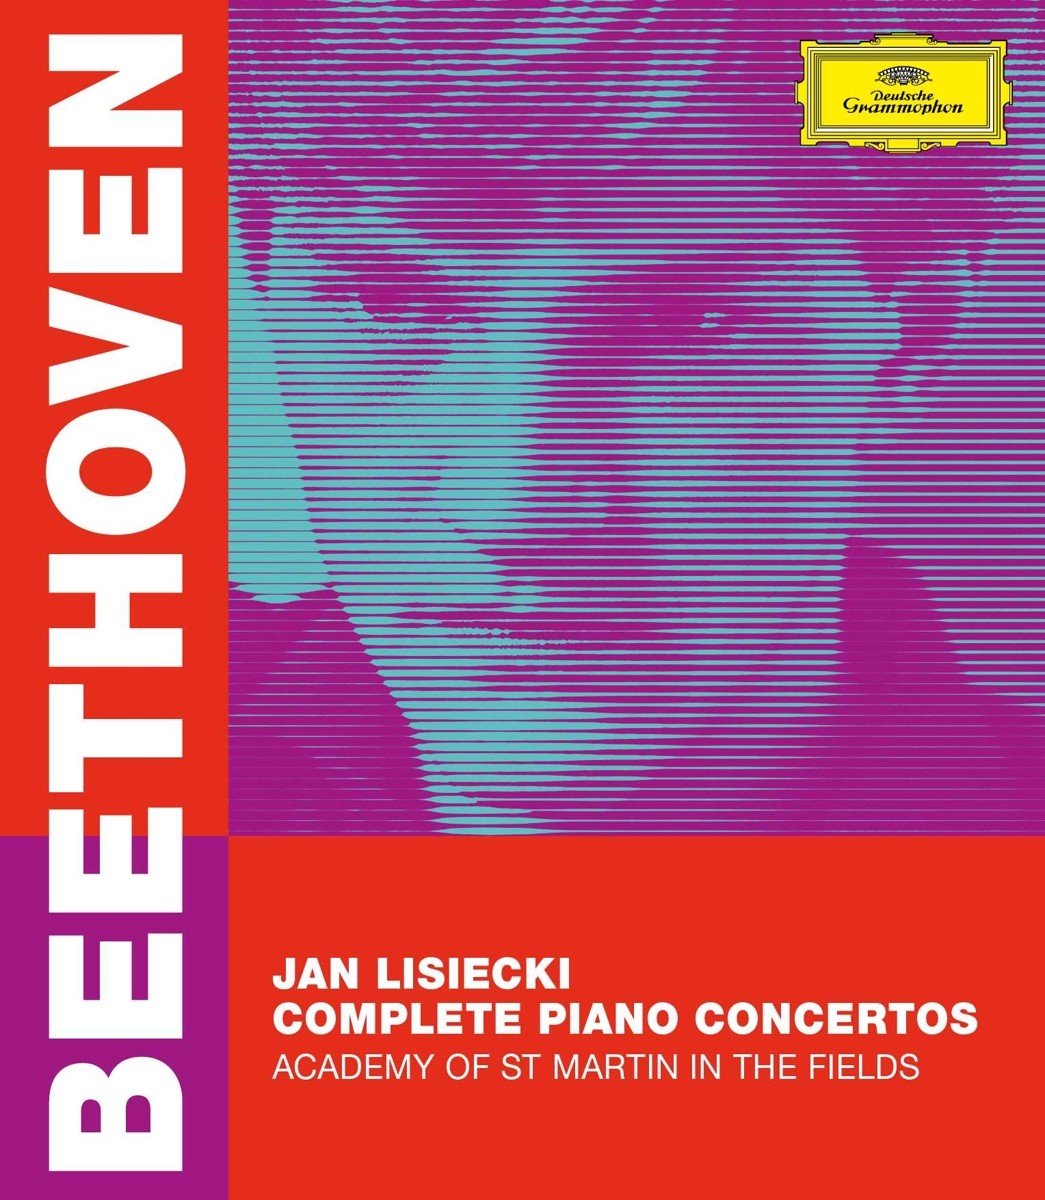 Jan Lisiecki, Academy Of St. Martin In The Fields - Beethoven: Complete Piano Concertos (Blu-ray)